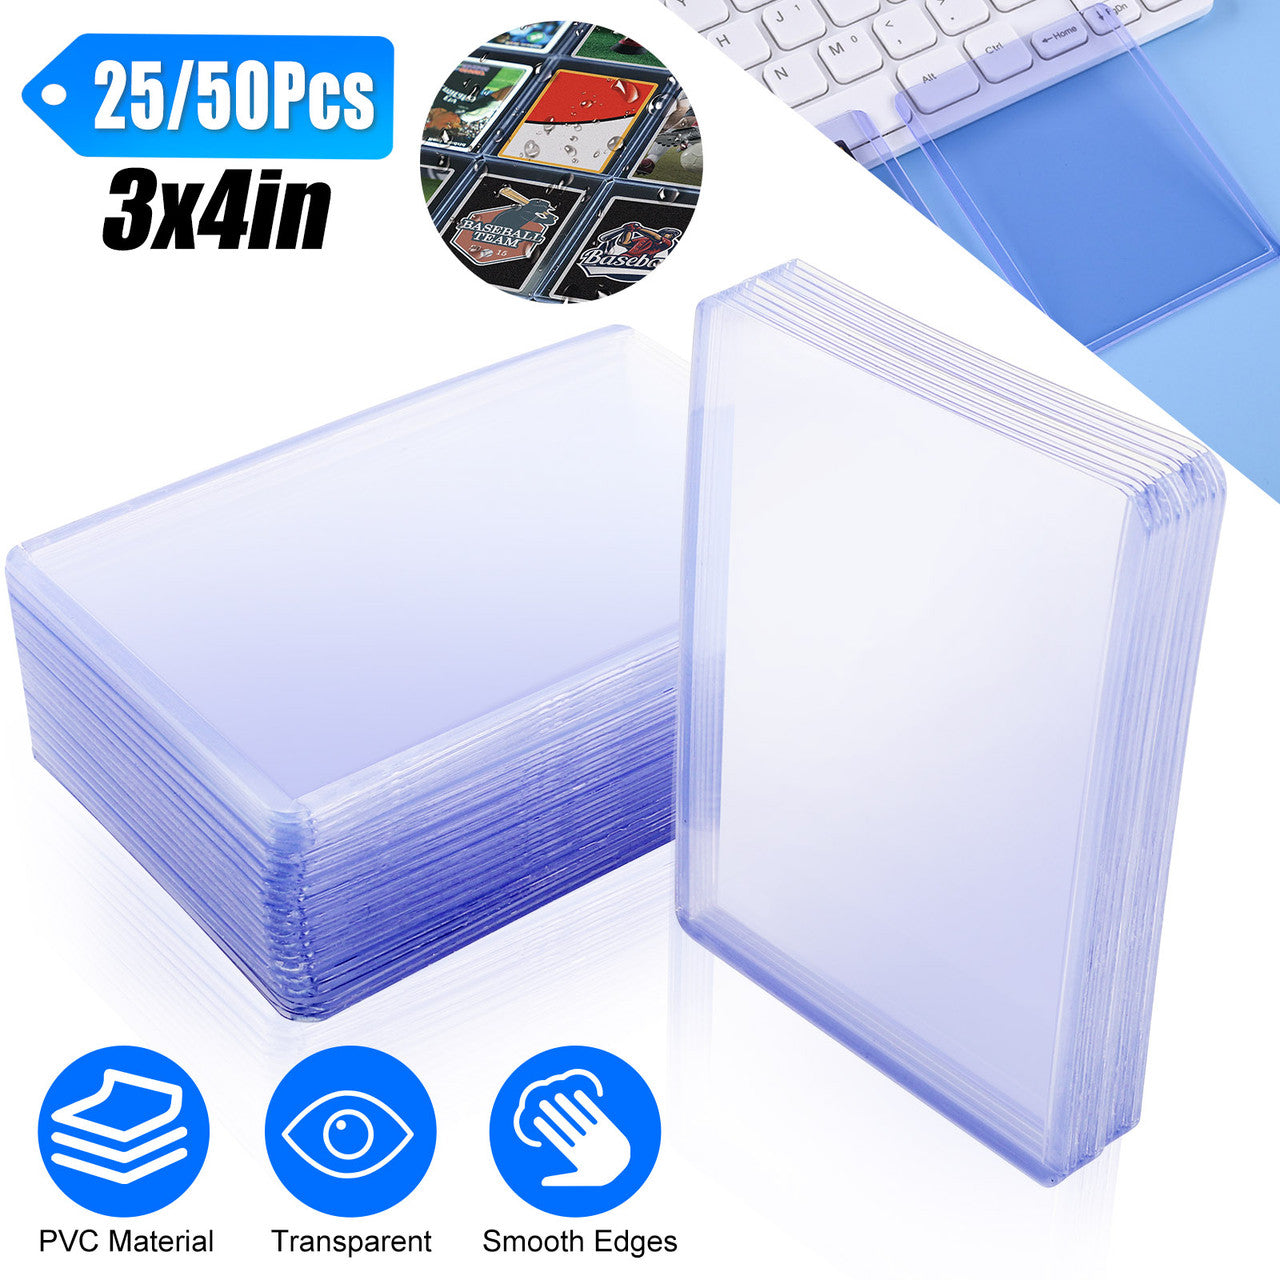 3” X 4” Top Load Card Holder for Standard Trading Cards 25-Count for Baseball, Football, Basketball, Hockey, Golf, Single Sports Cards Top Loads